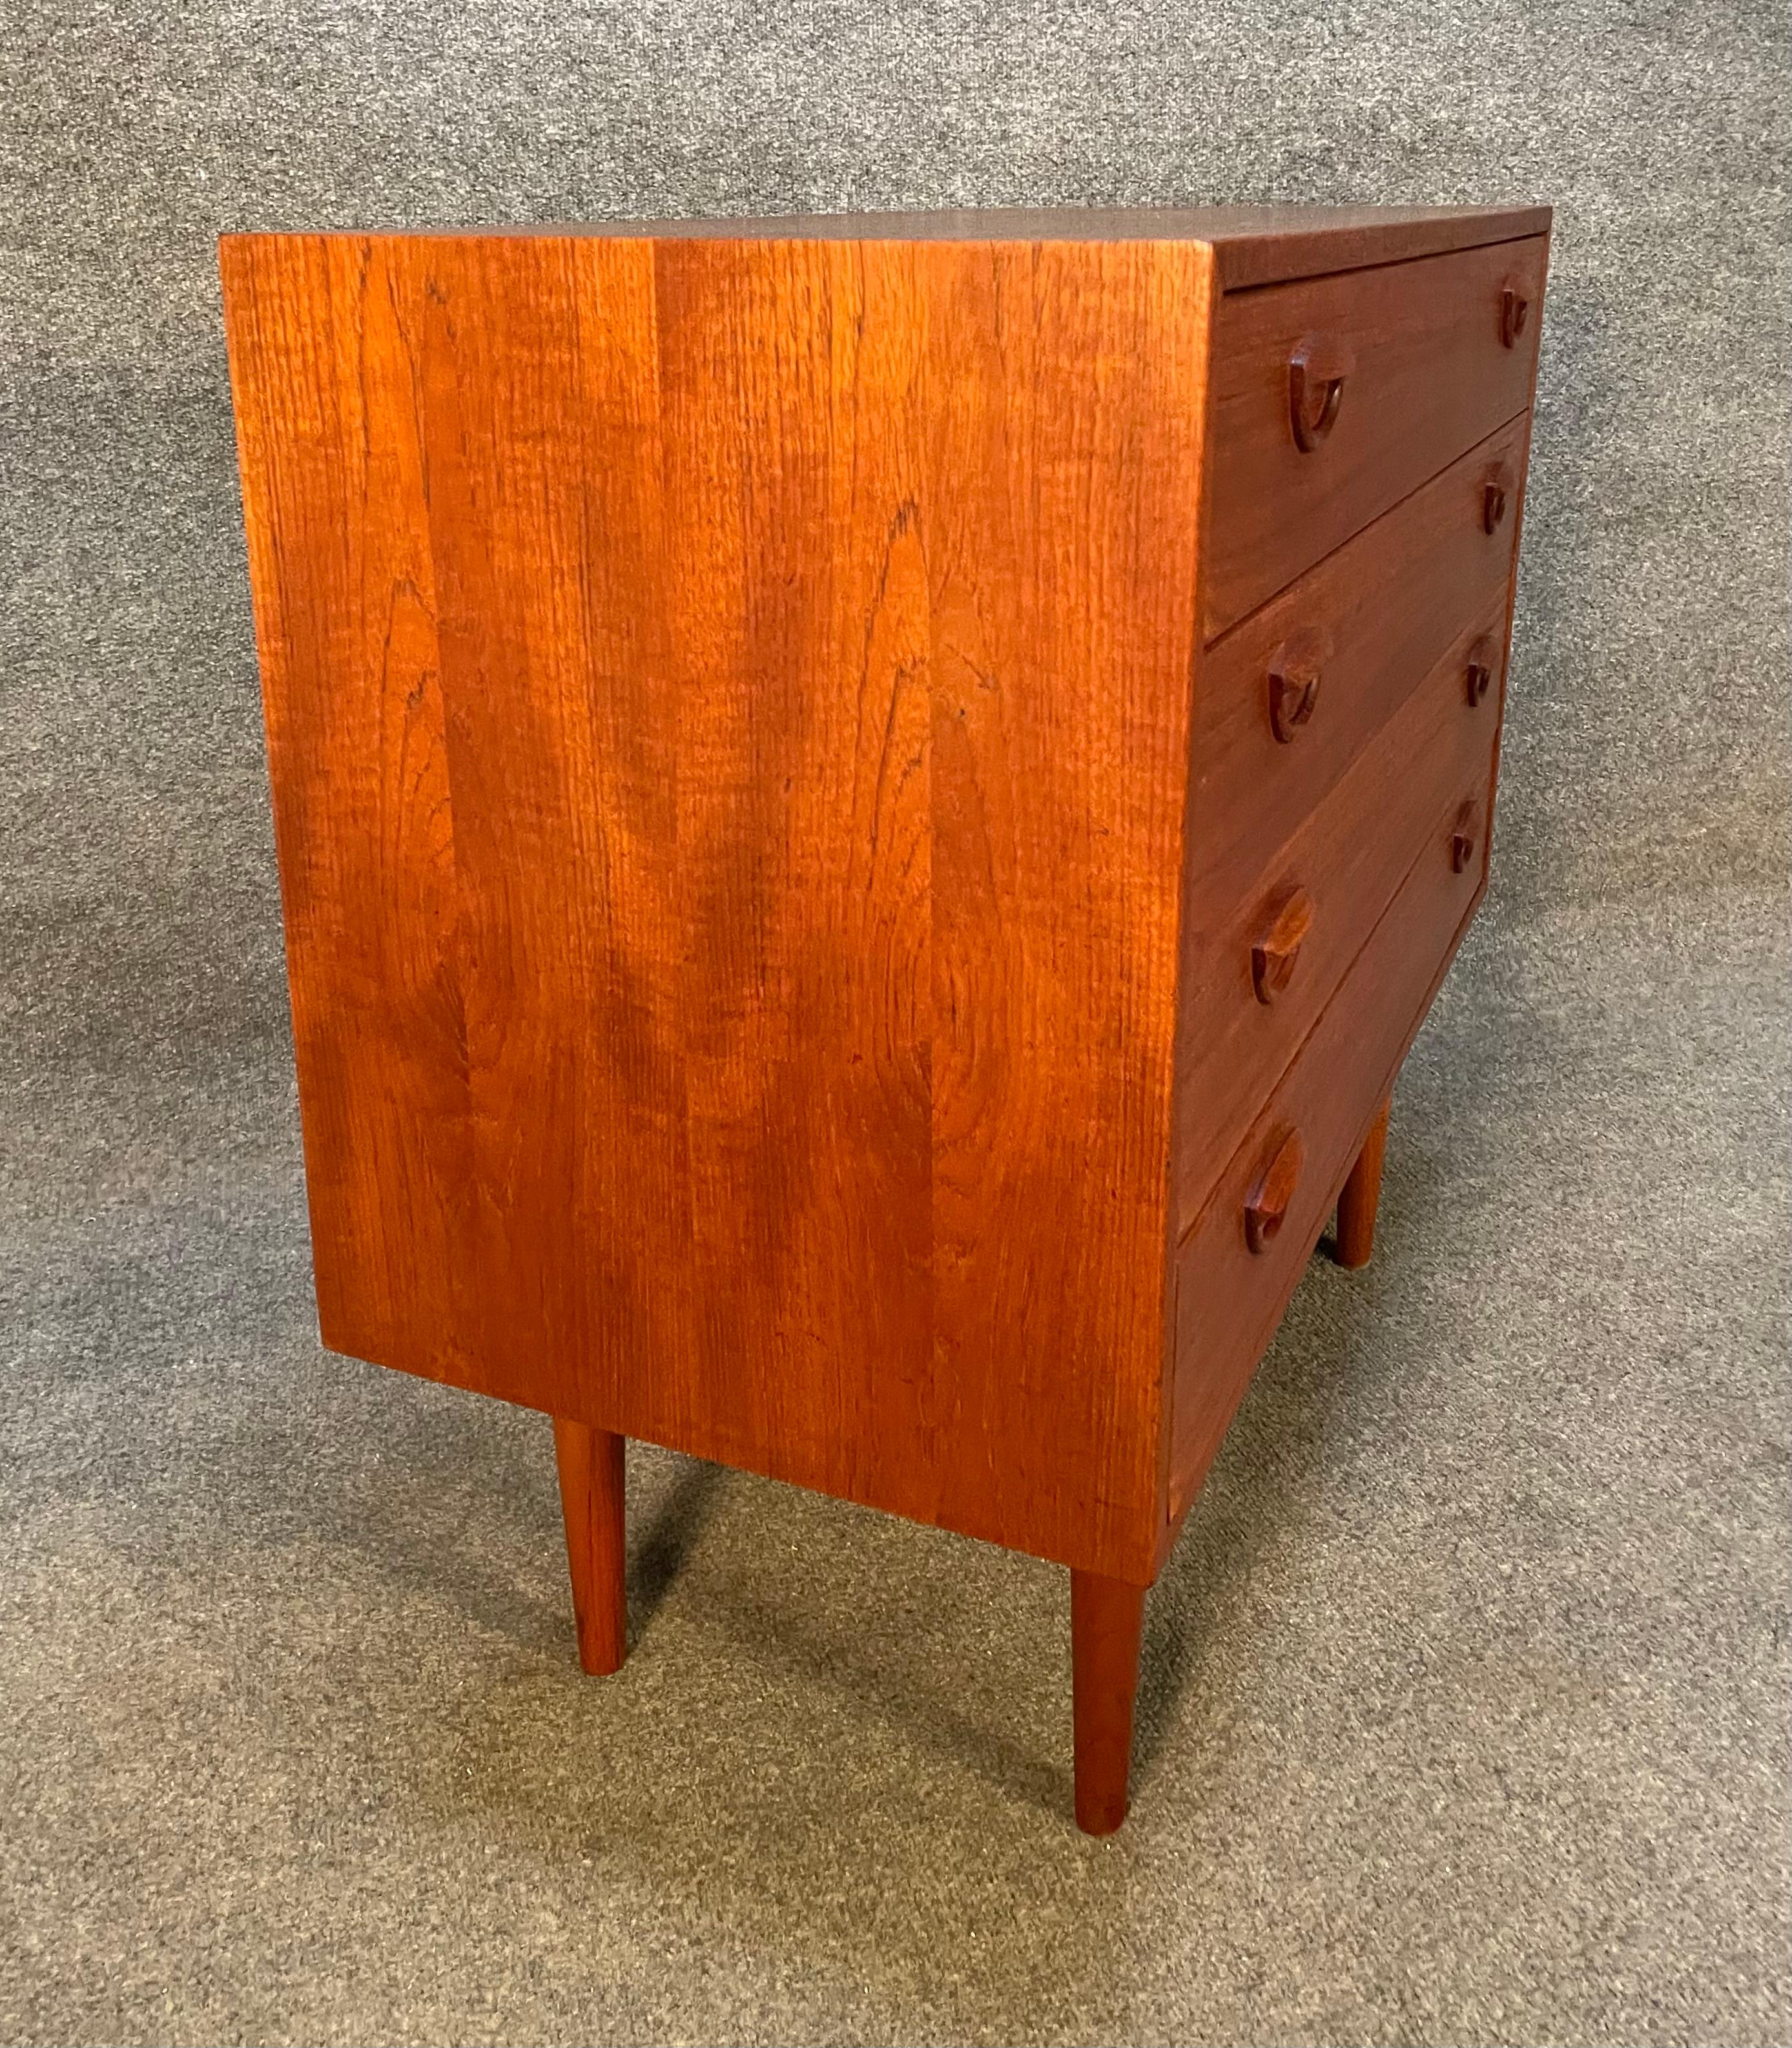 Vintage Danish Mid-Century Modern Teak Chest of Drawers, Dresser by Kai Kristia In Good Condition For Sale In San Marcos, CA